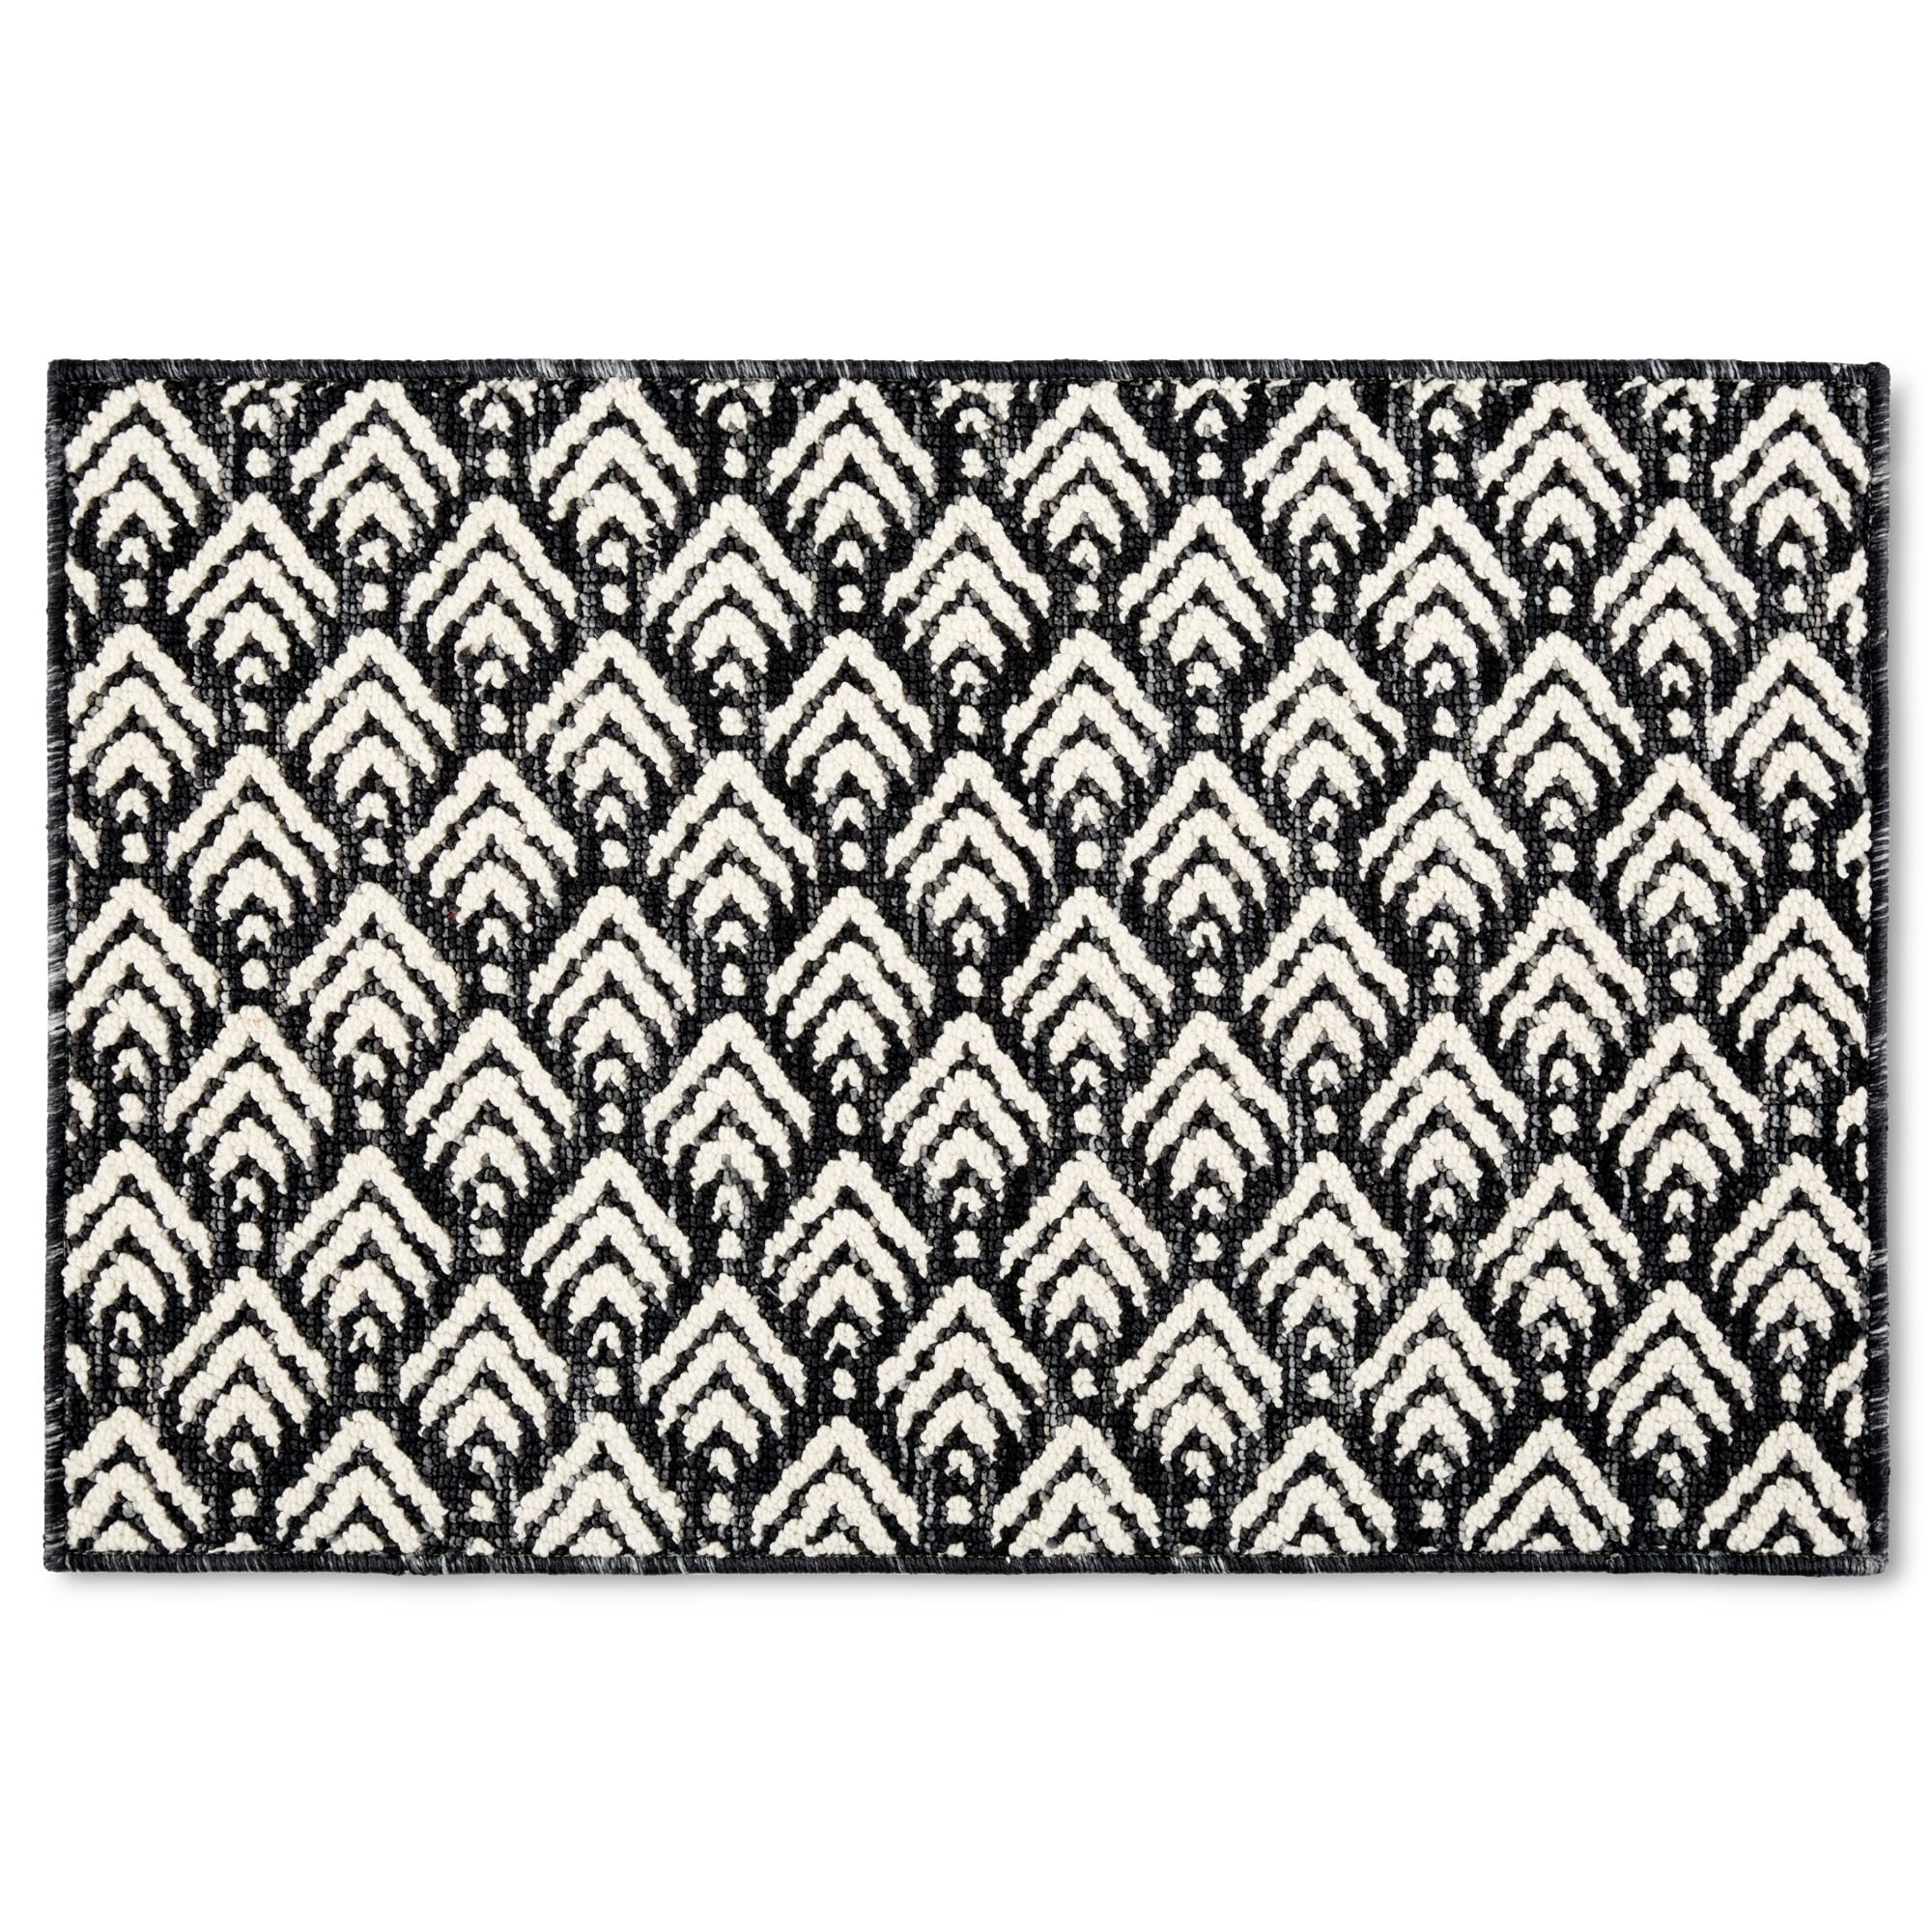 Mainstays Walker Woven Fabric Mat, 18"x27", Black, Available in Multiple Colors